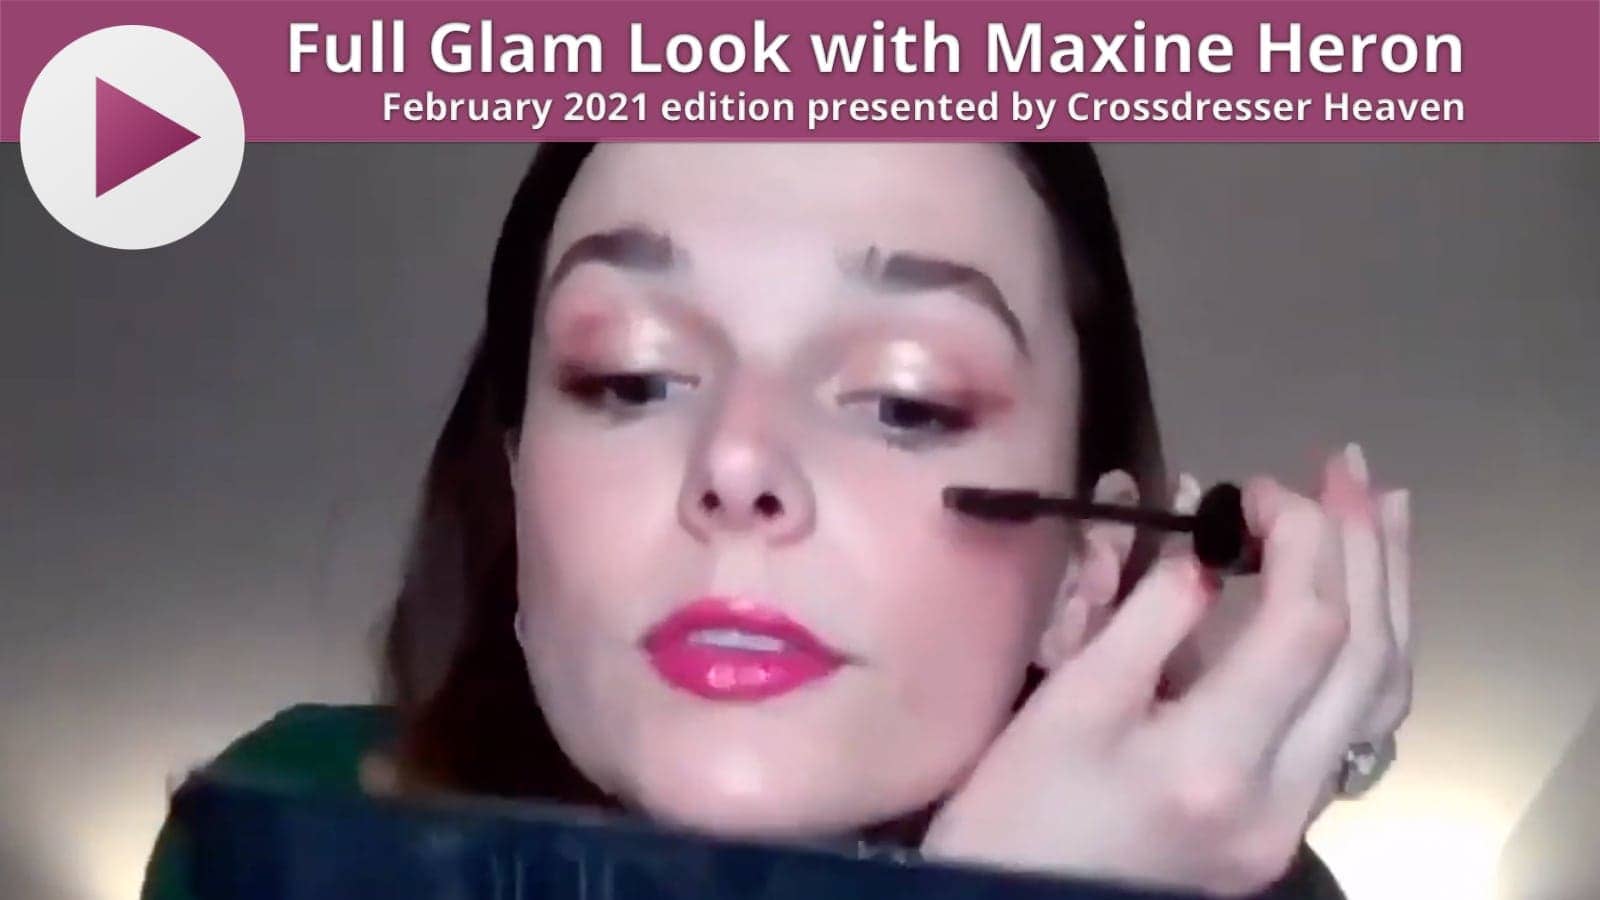 Full Glam Look with Maxine Heron